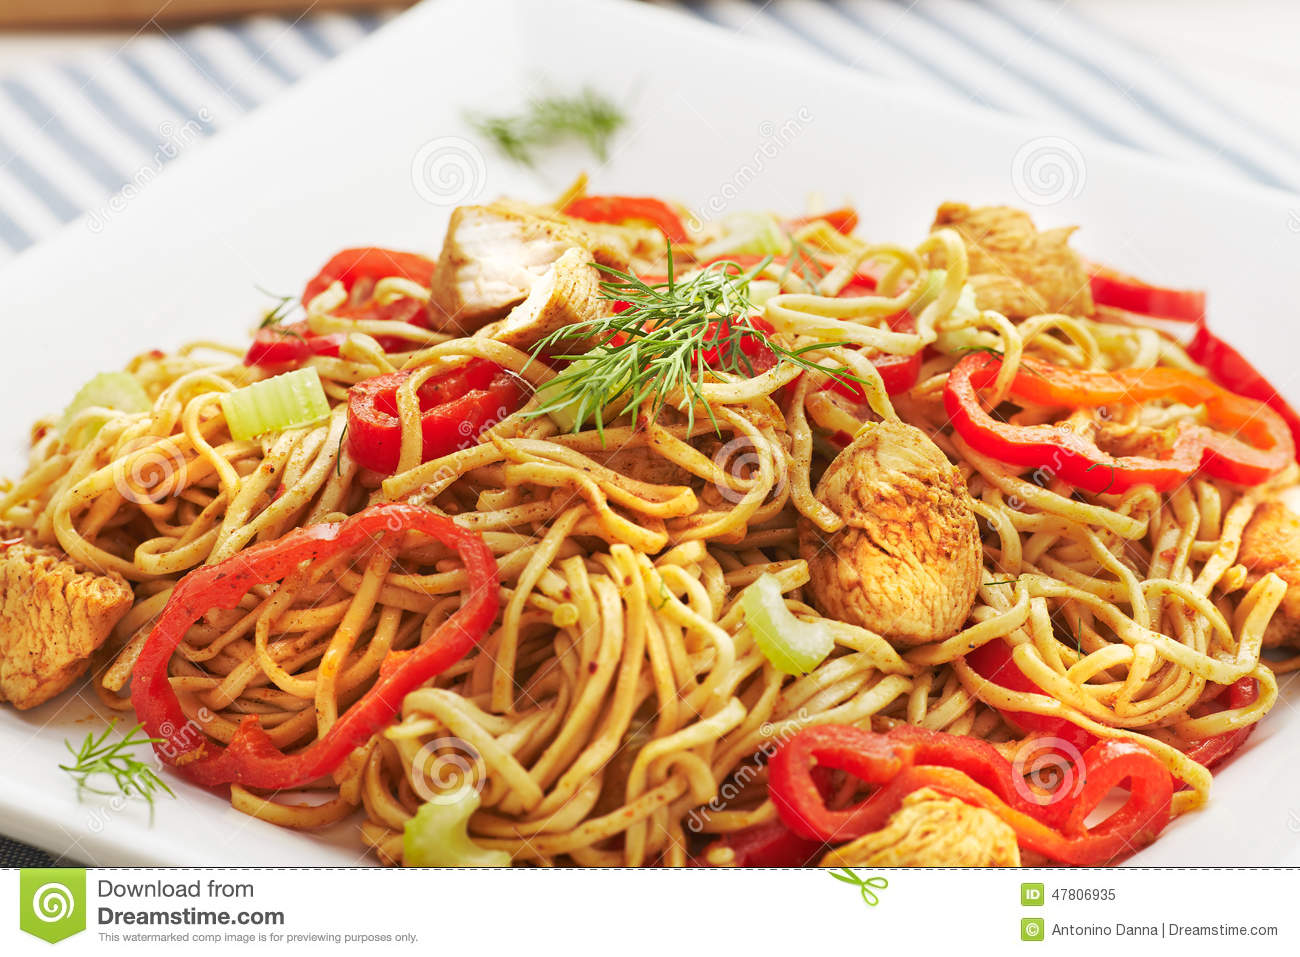 Chicken Noodles Stock Photo   Image  47806935